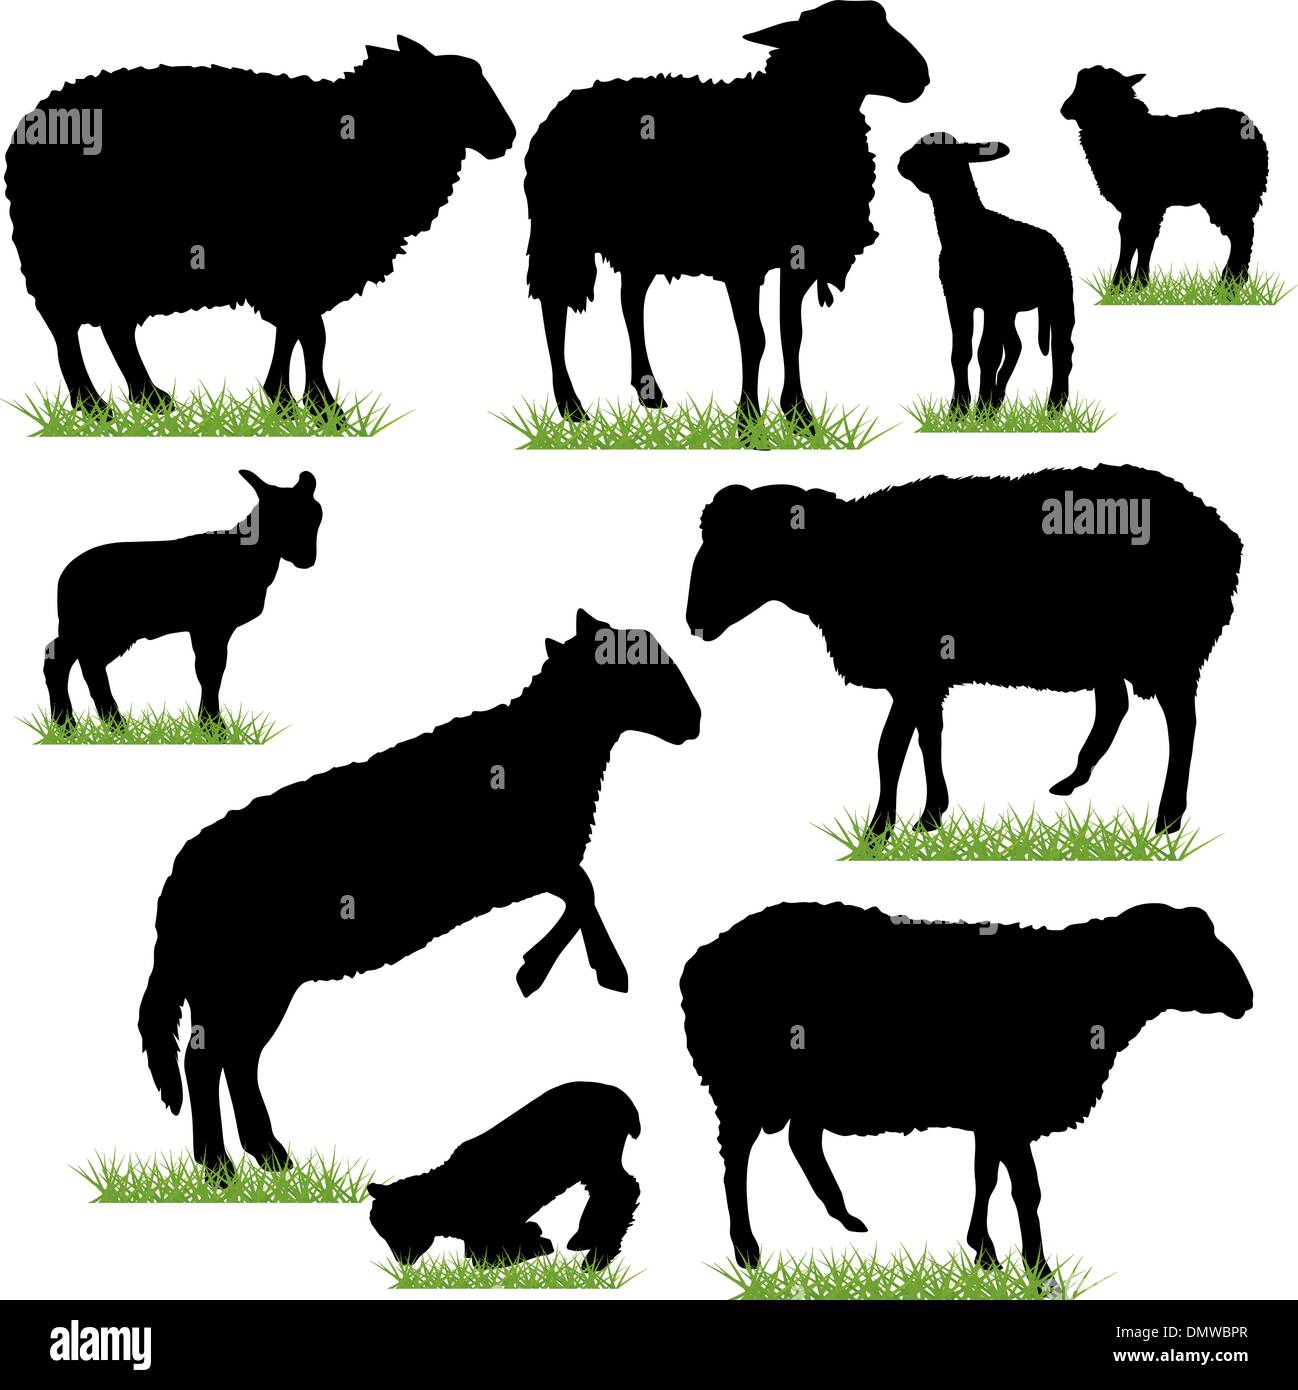 Sheep and Lambs Silhouettes Set Stock Vector